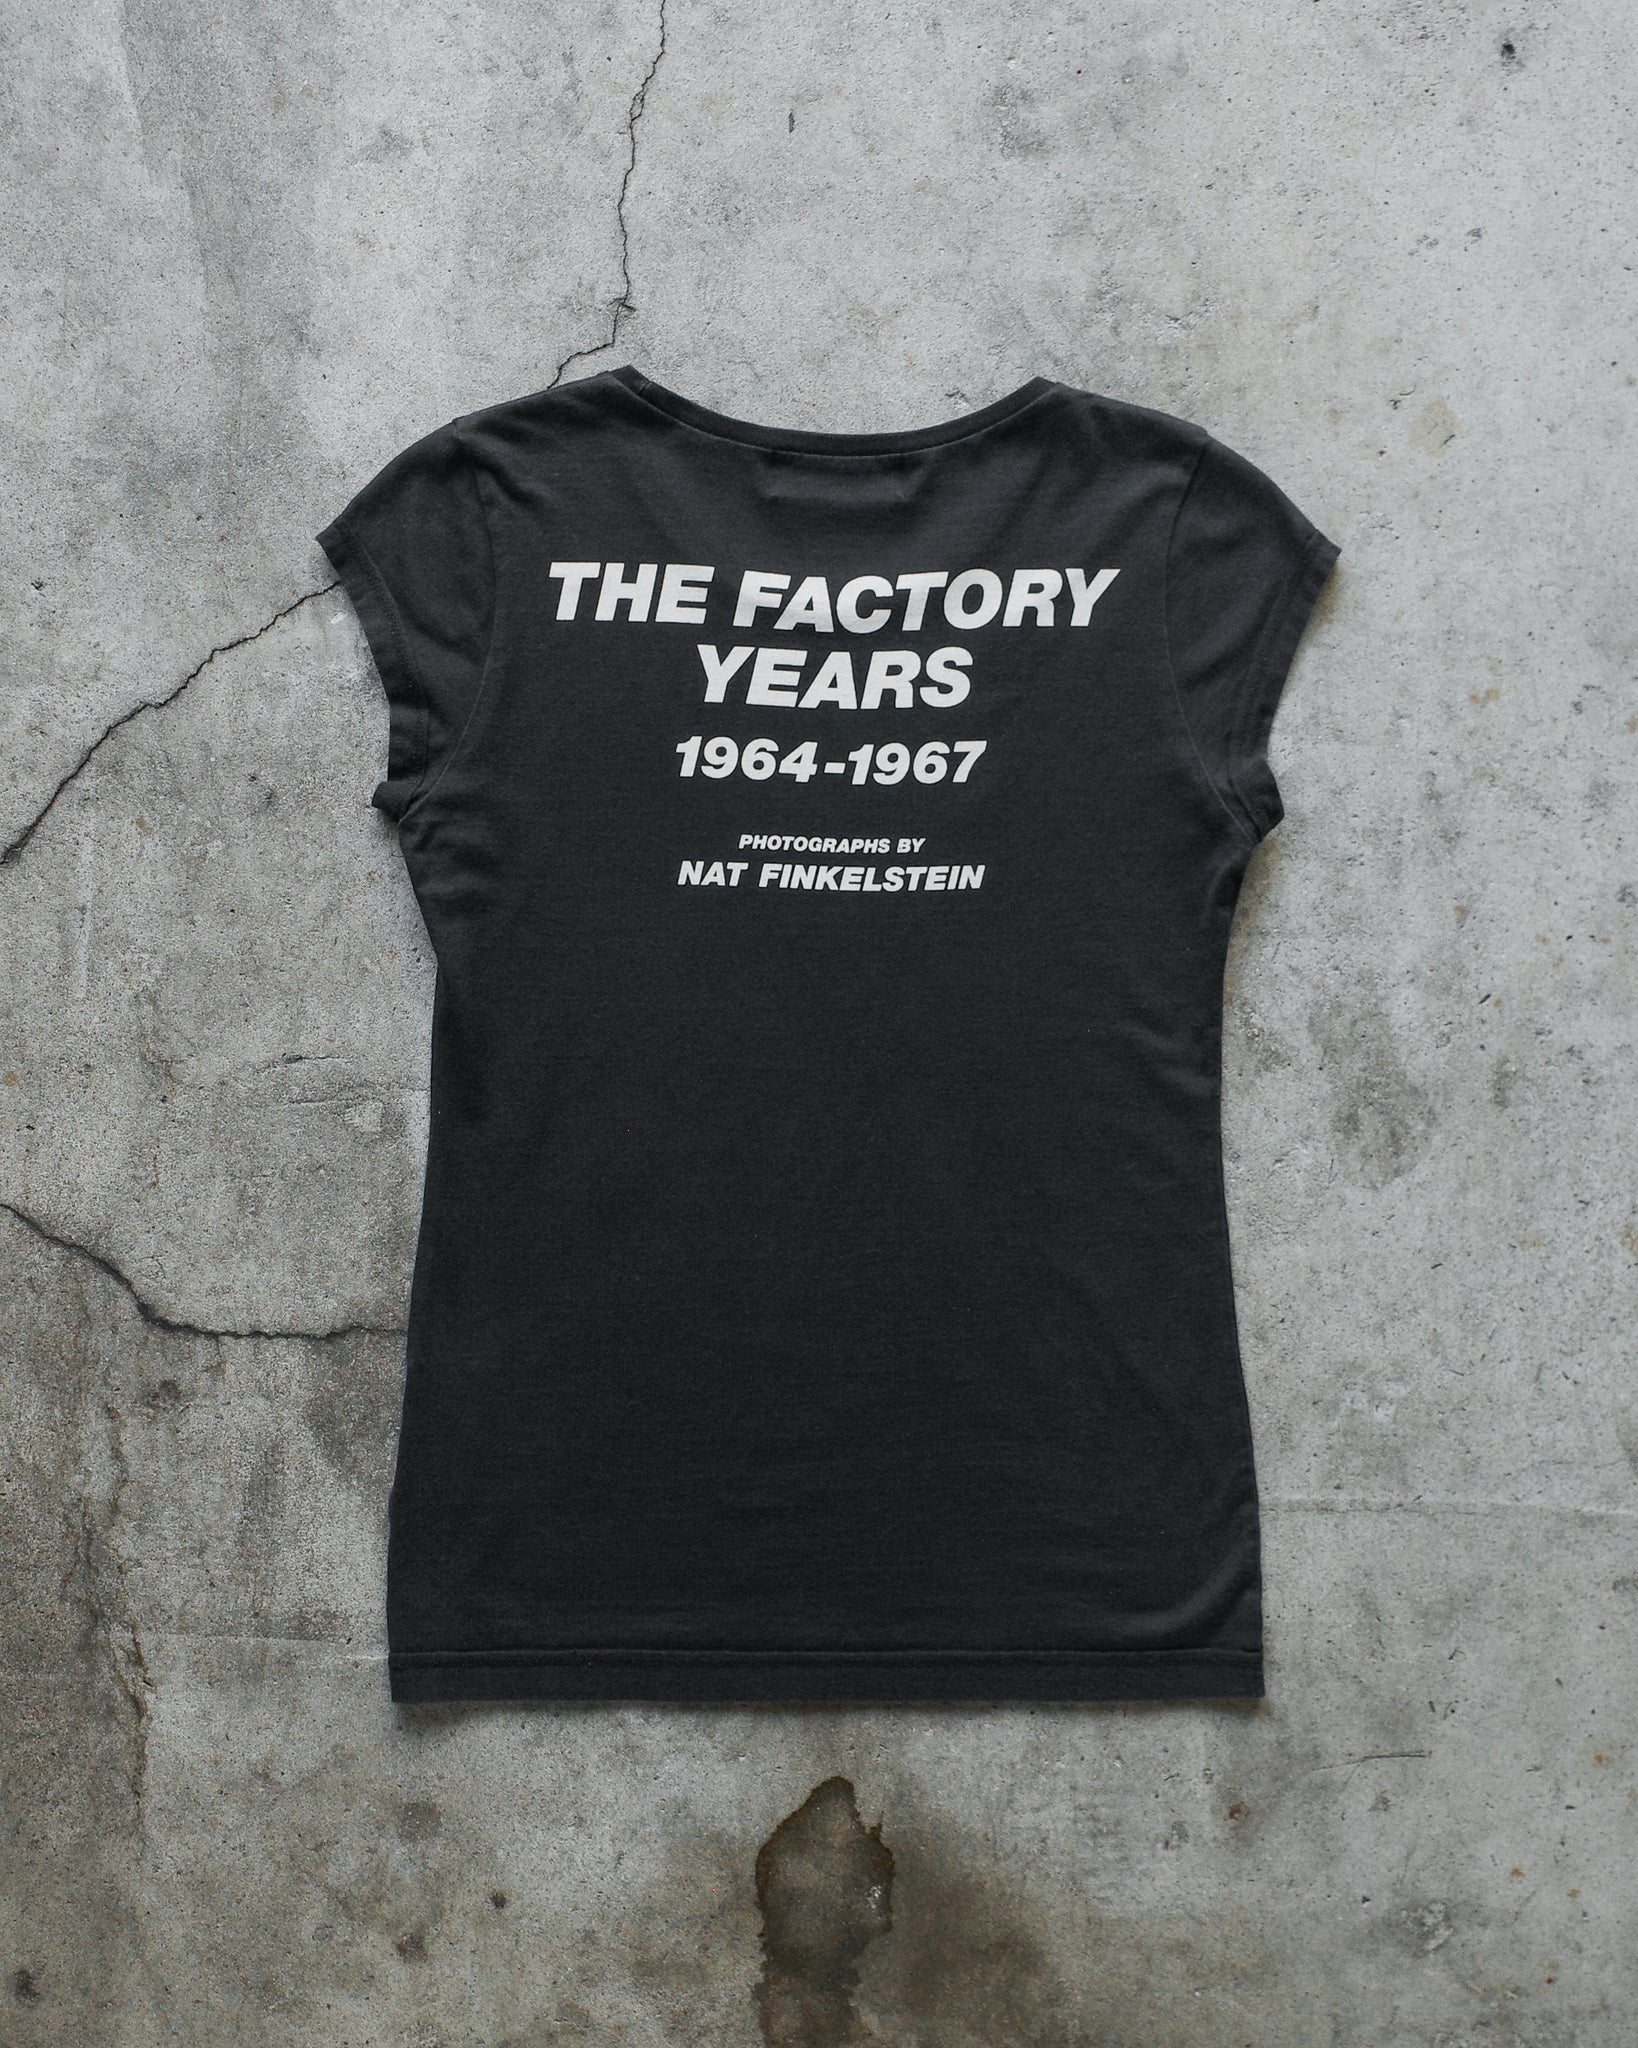 Hysteric Glamour x Andy Warhol "The Factory Years" Tee